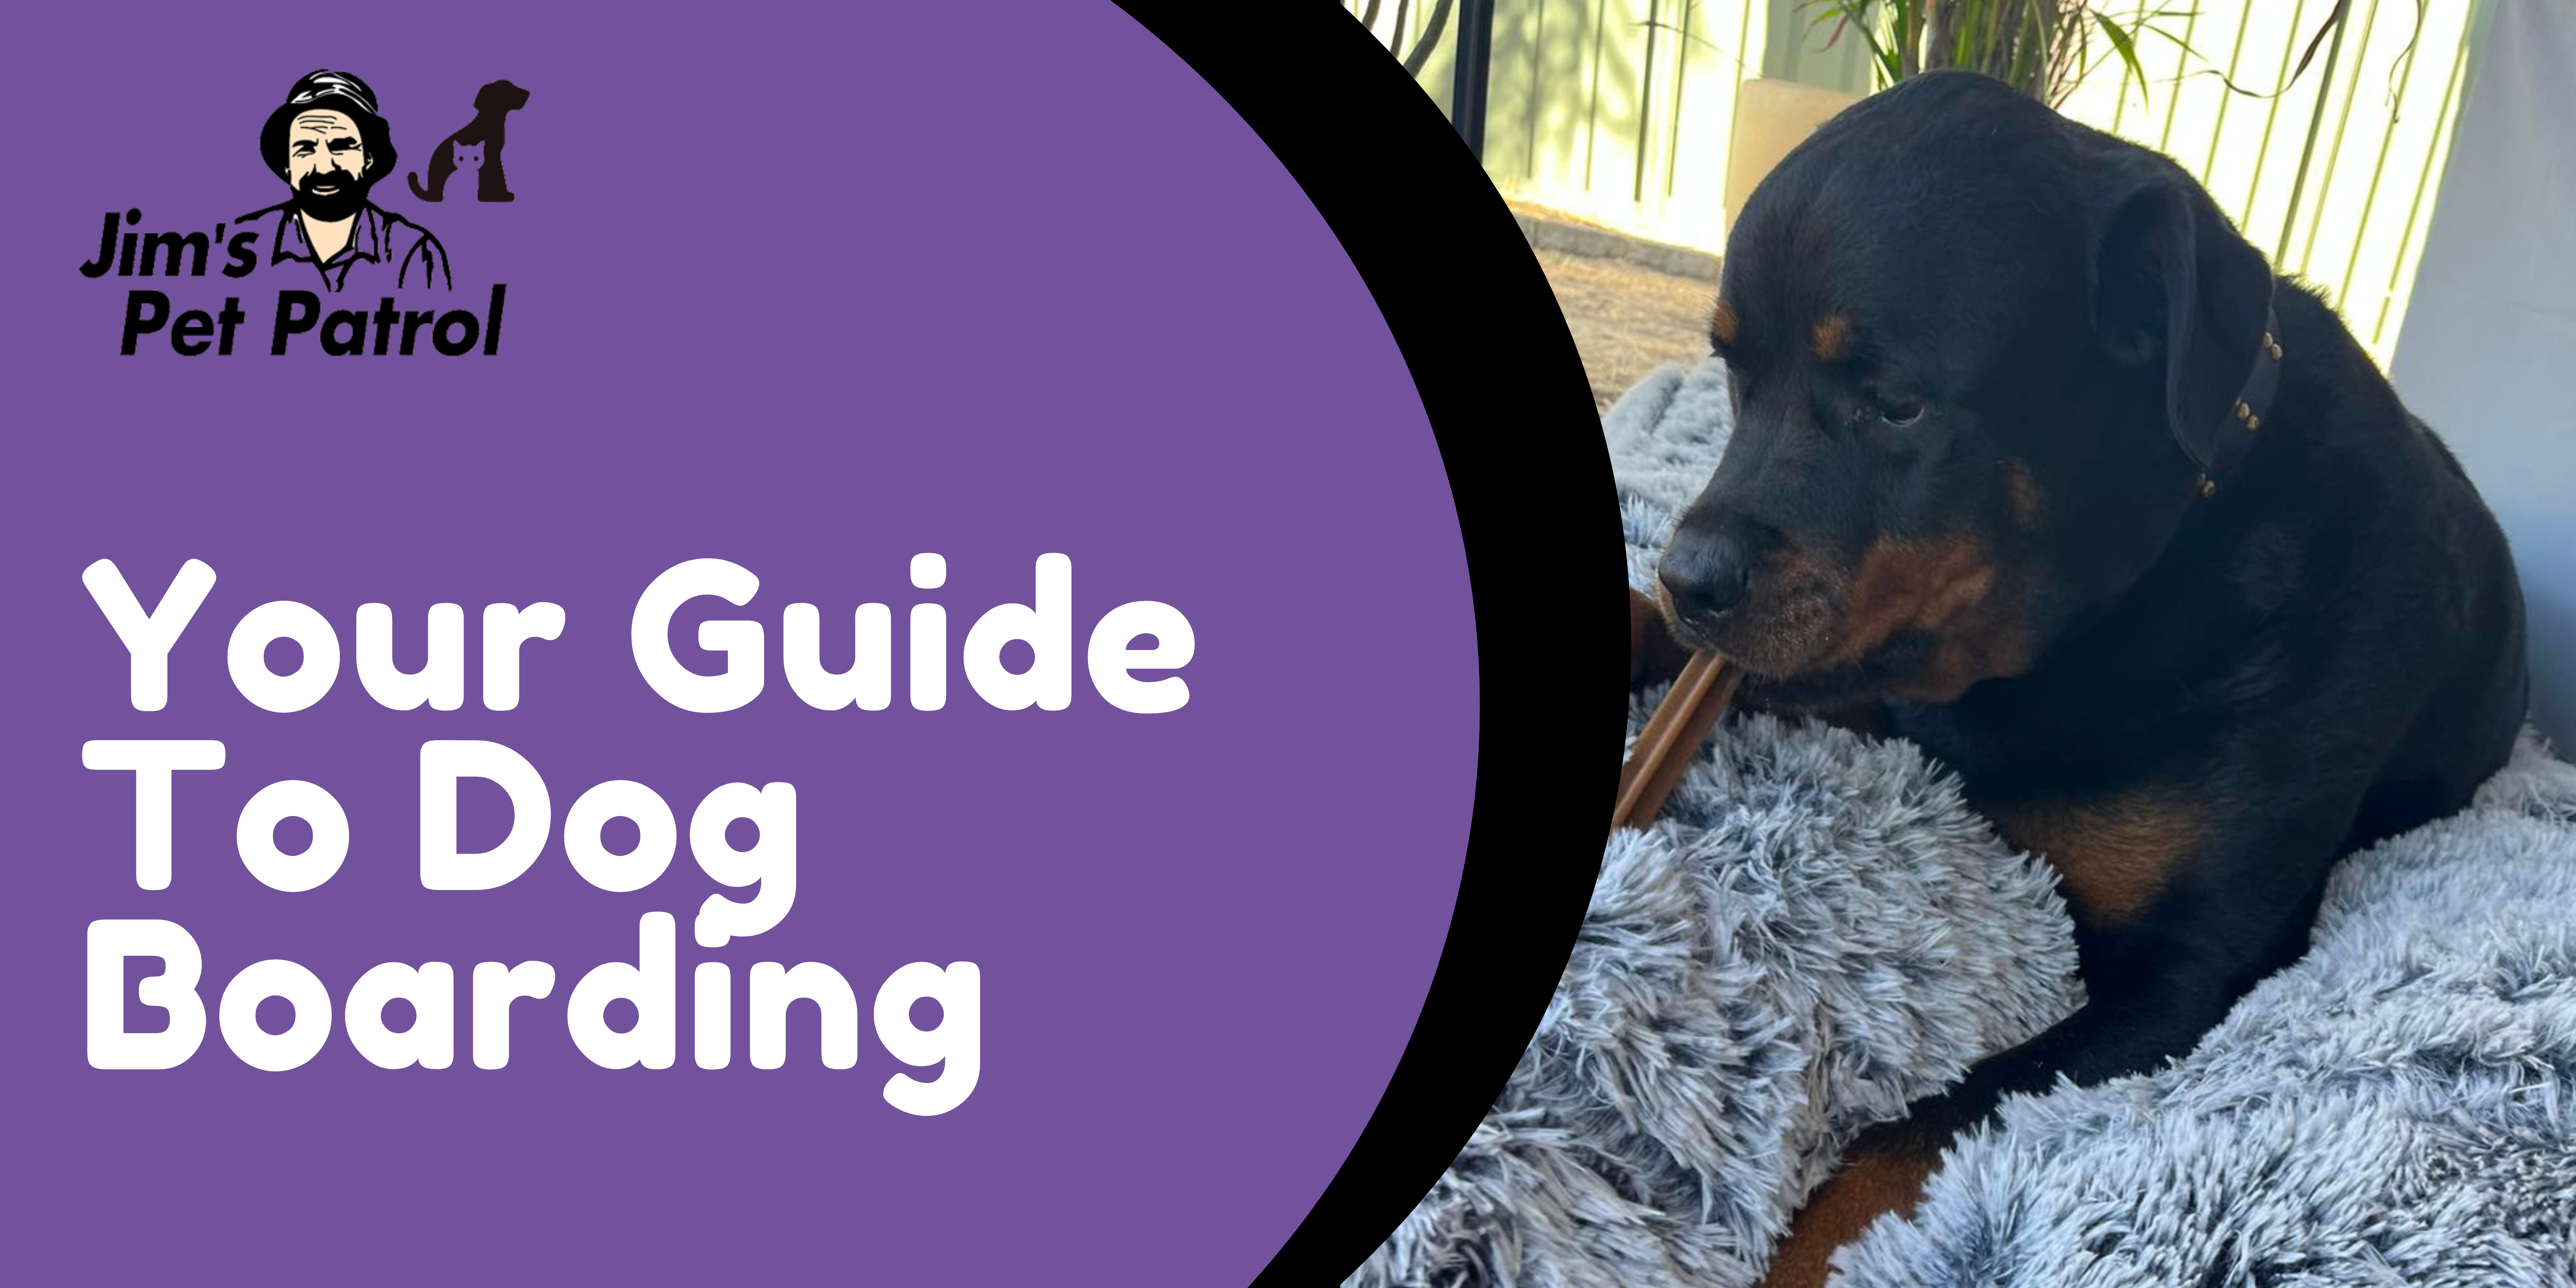 Your Guide To Dog Boarding